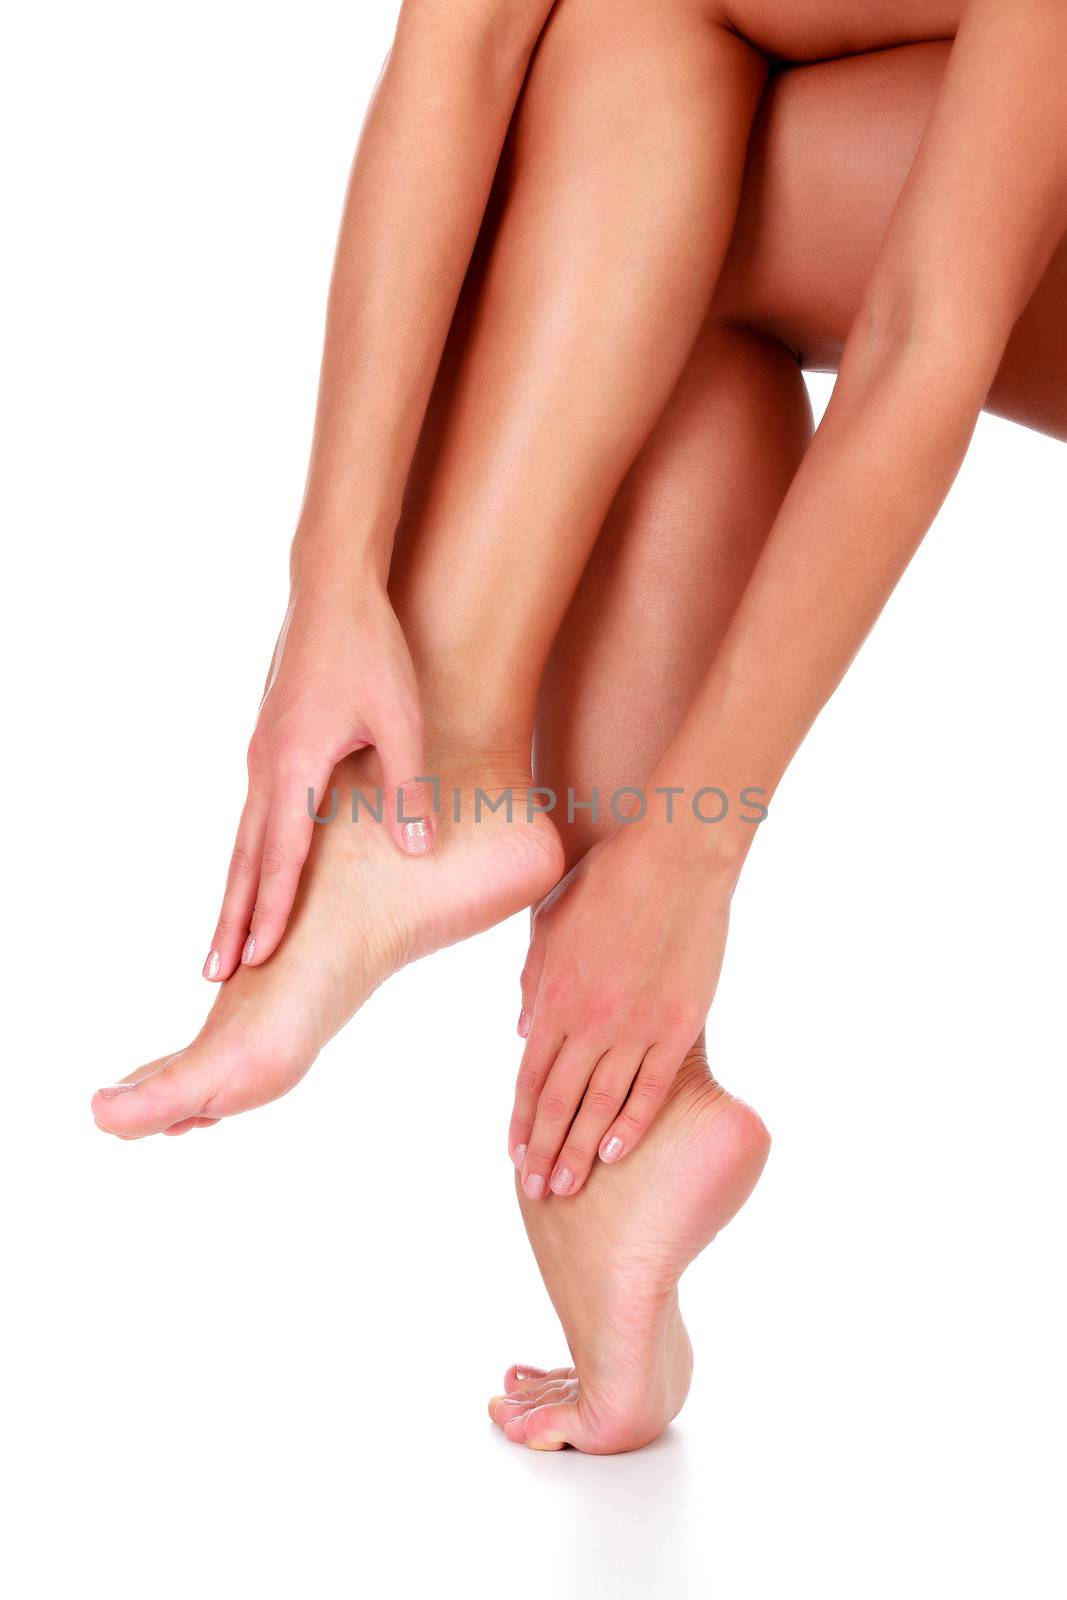 Closeup shot of healthy legs of beautiful woman, isolated on white background